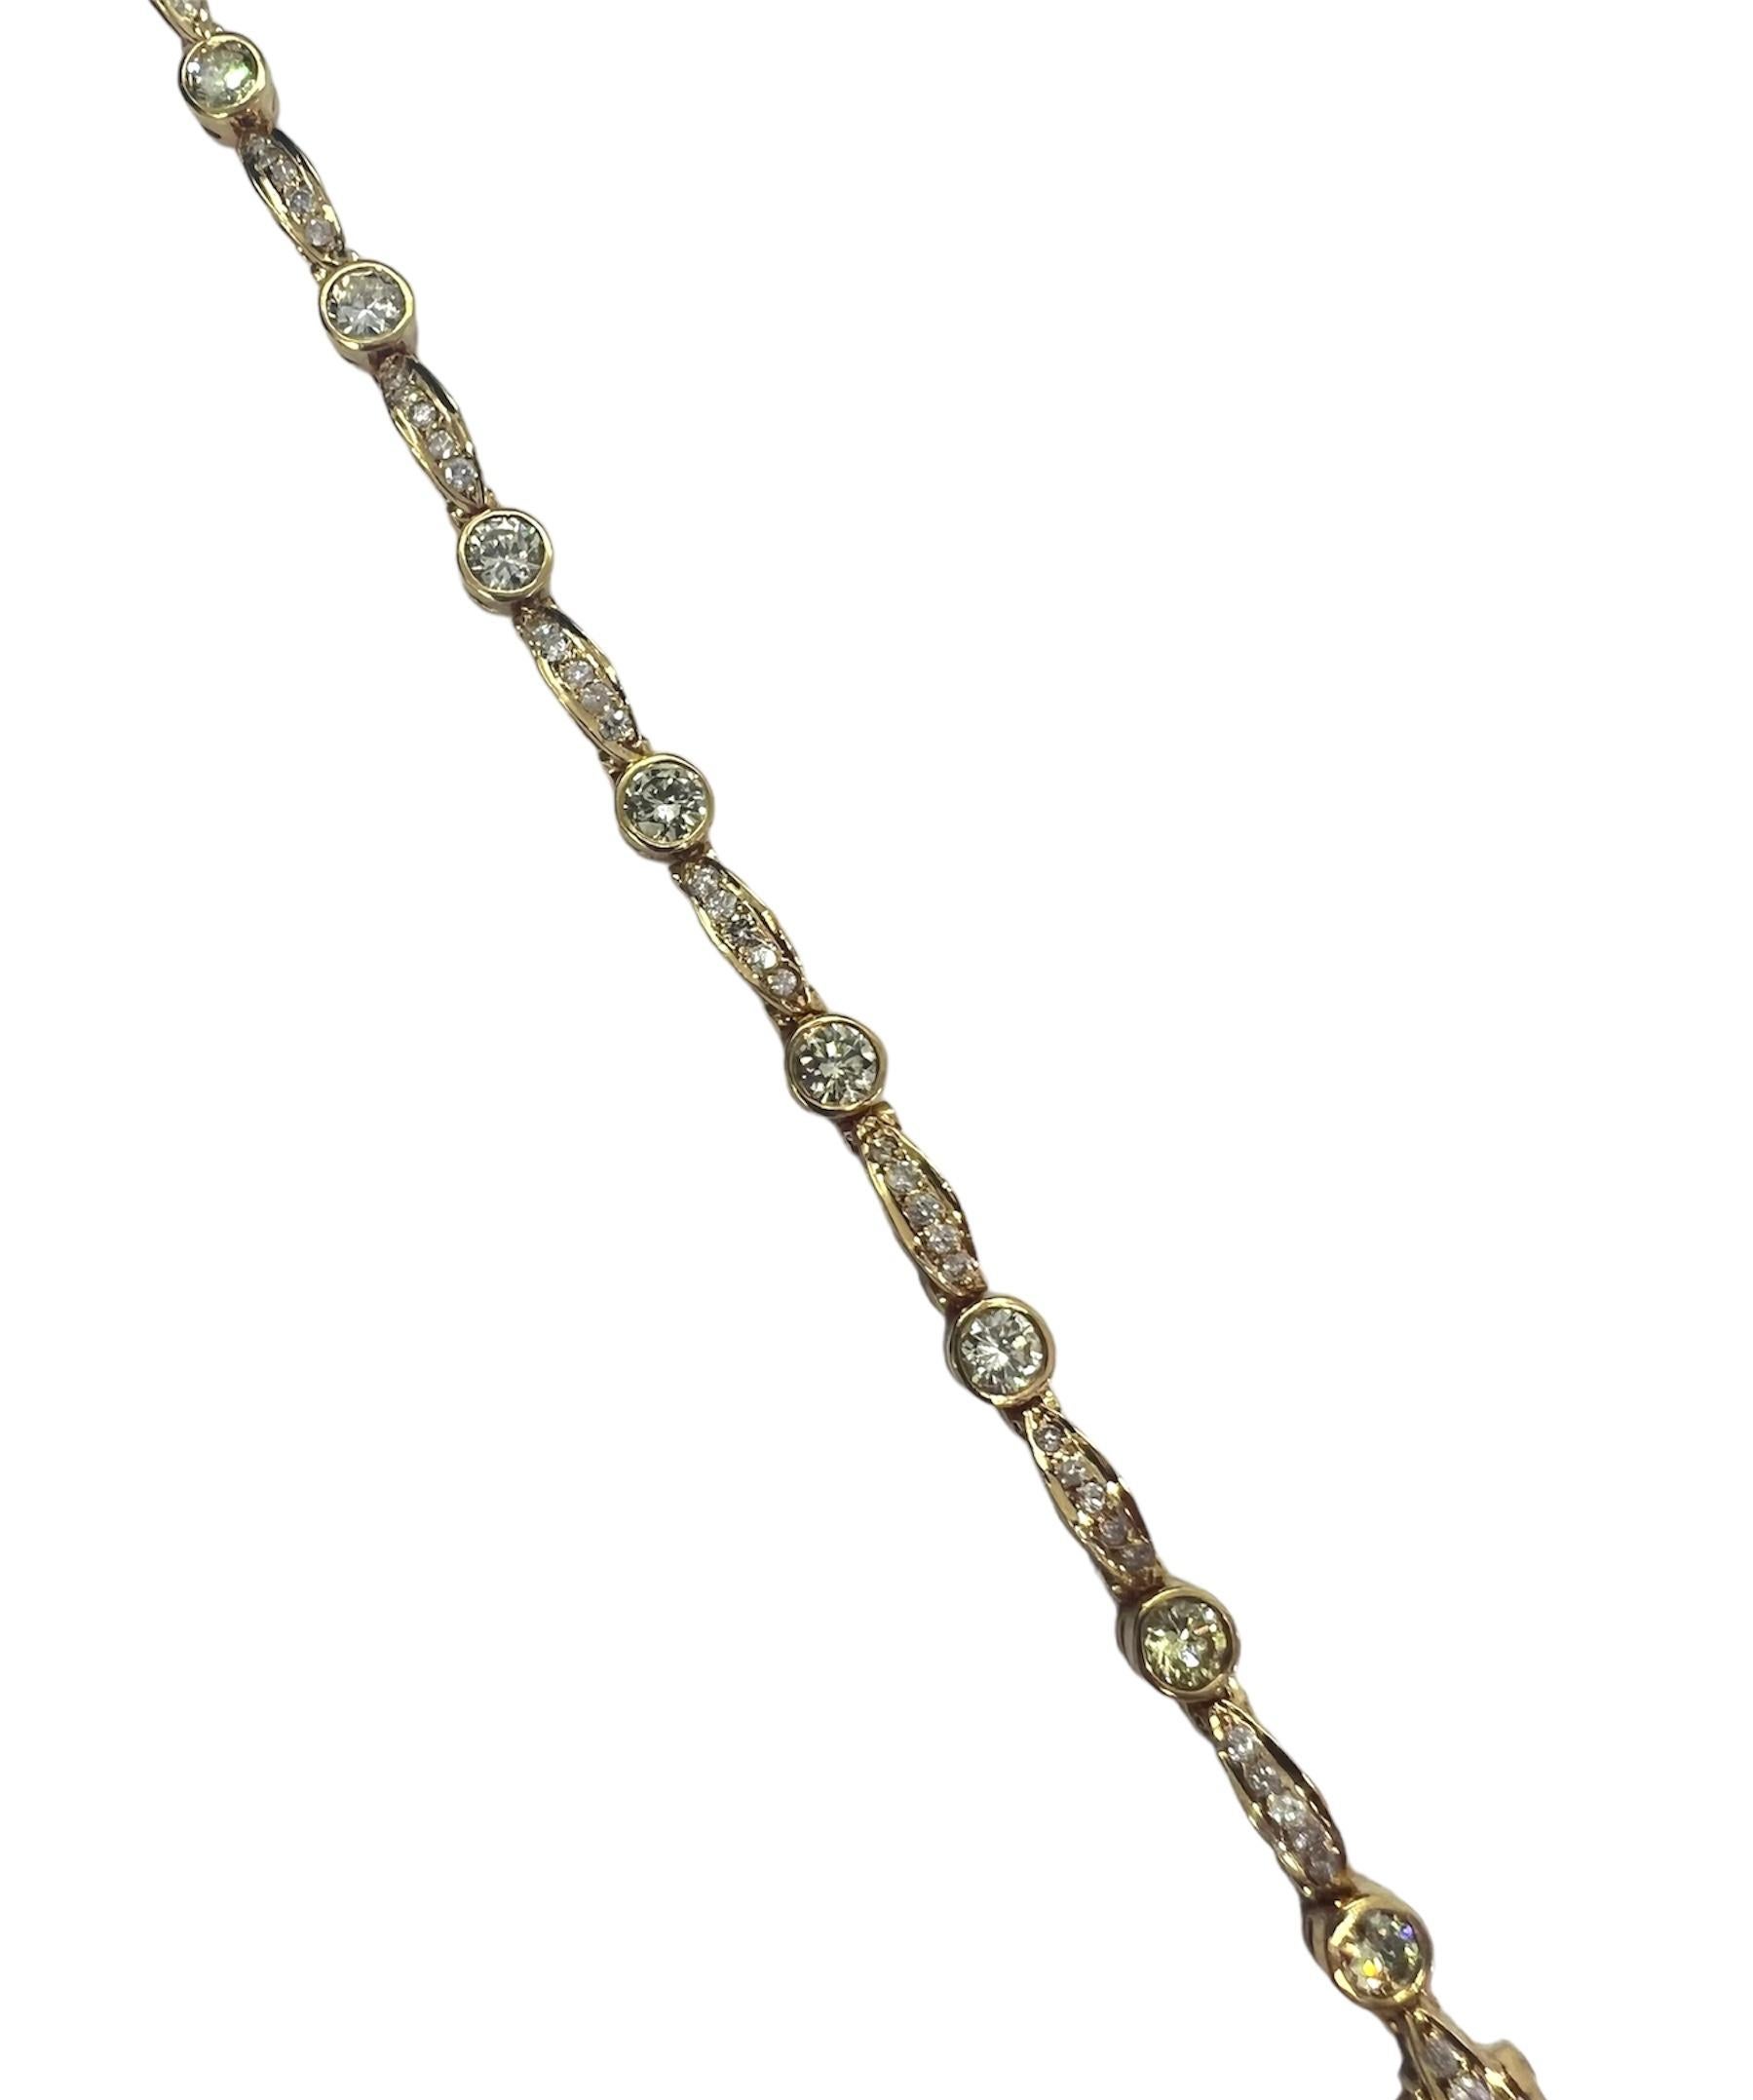 Yellow gold bracelet with diamonds.

Sophia D by Joseph Dardashti LTD has been known worldwide for 35 years and are inspired by classic Art Deco design that merges with modern manufacturing techniques.
